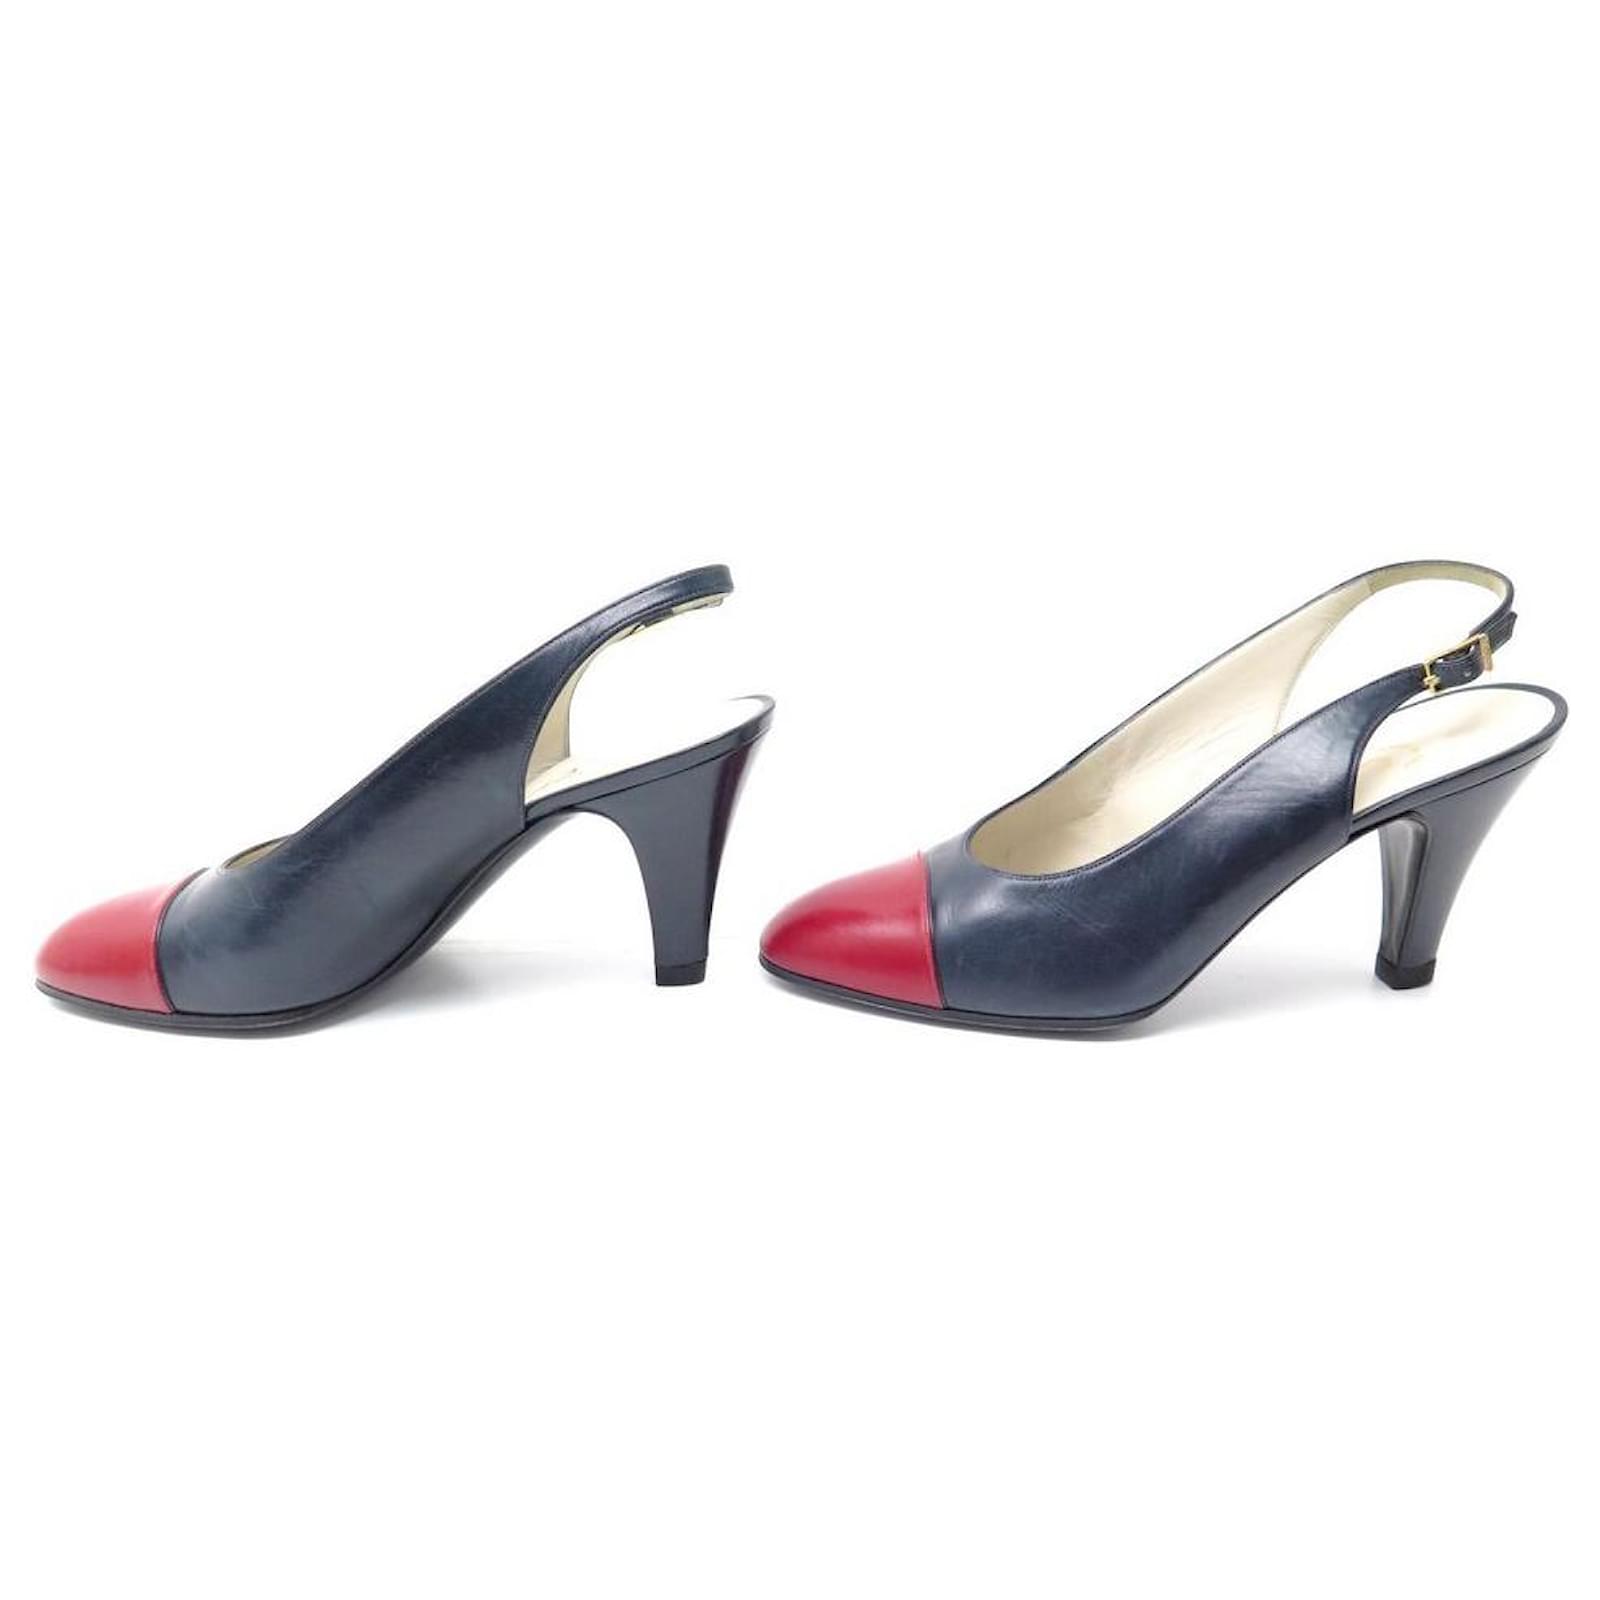 VINTAGE CHANEL SHOES PUMPS 39 6 TWO-TONE BLUE AND RED LEATHER SHOES